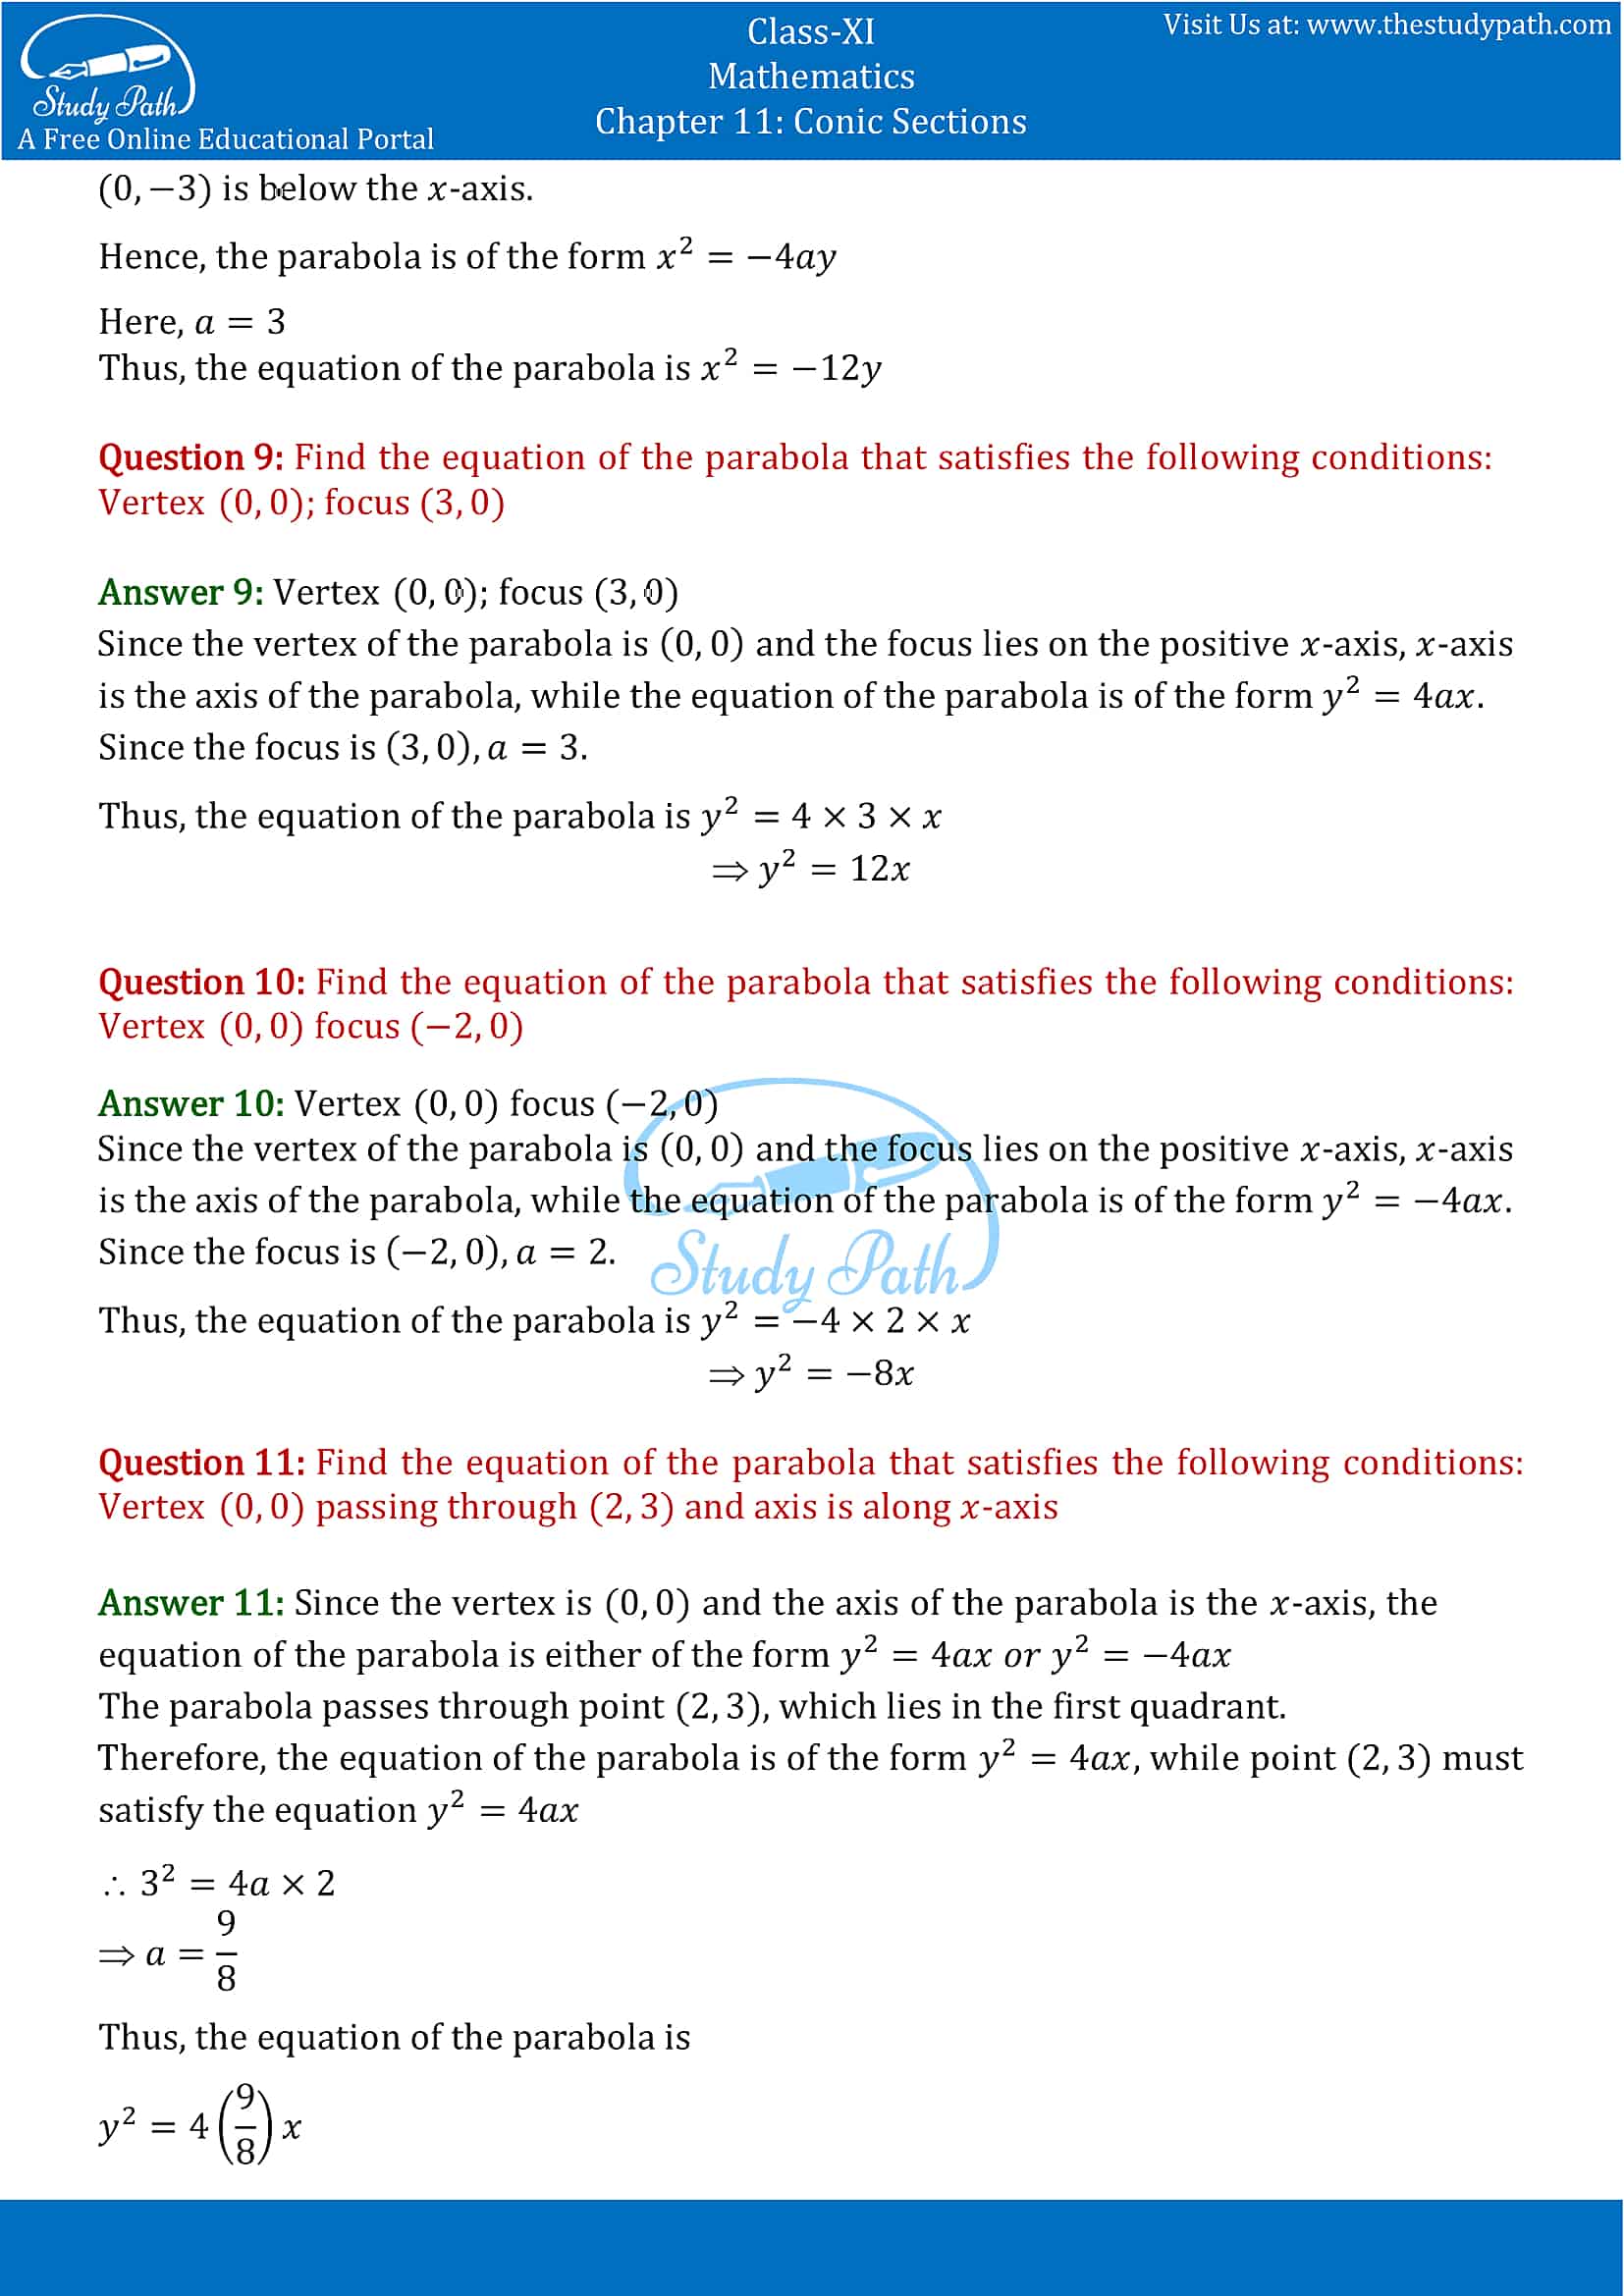 NCERT Solutions for Class 11 Maths chapter 11 Conic Section Exercise 11.2 Part-4